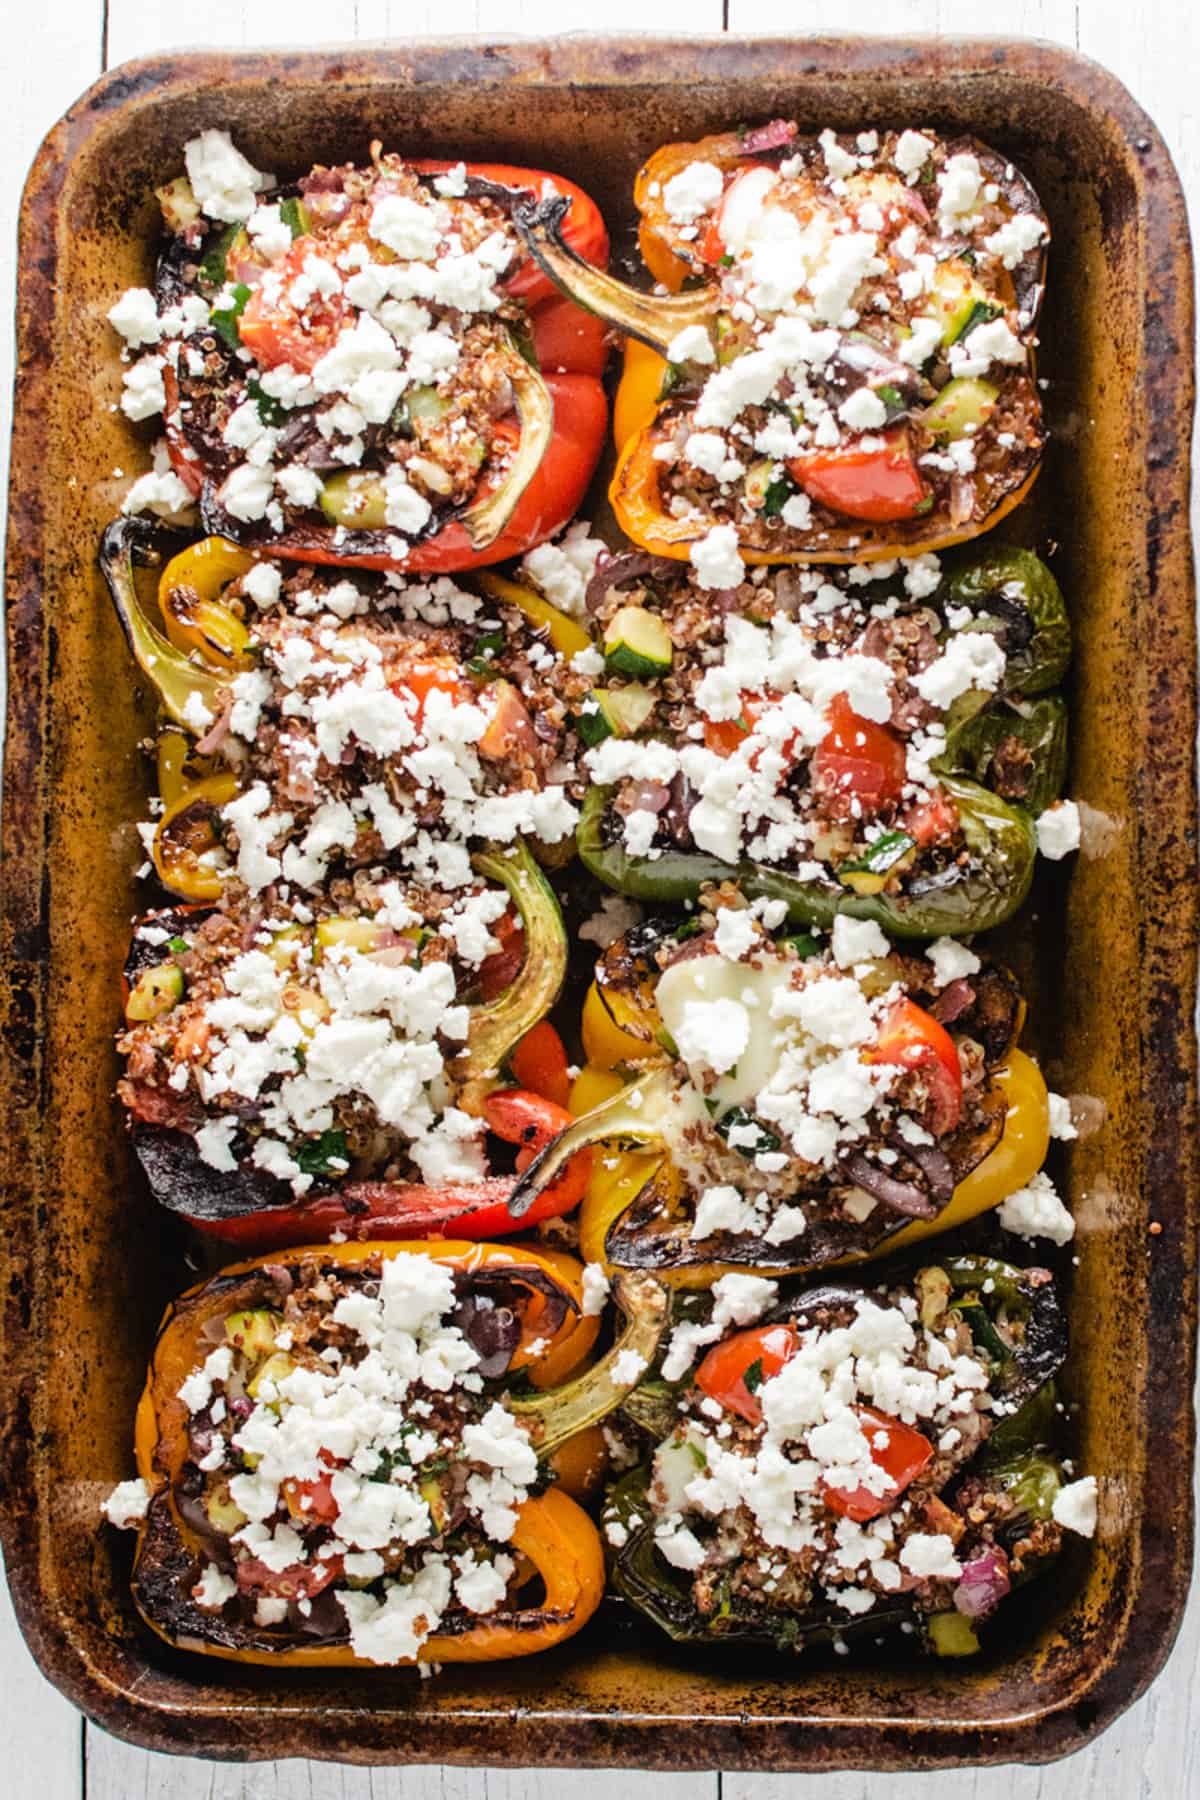 8 pepper halves stuffed with quinoa filling and topped with feta cheese. 